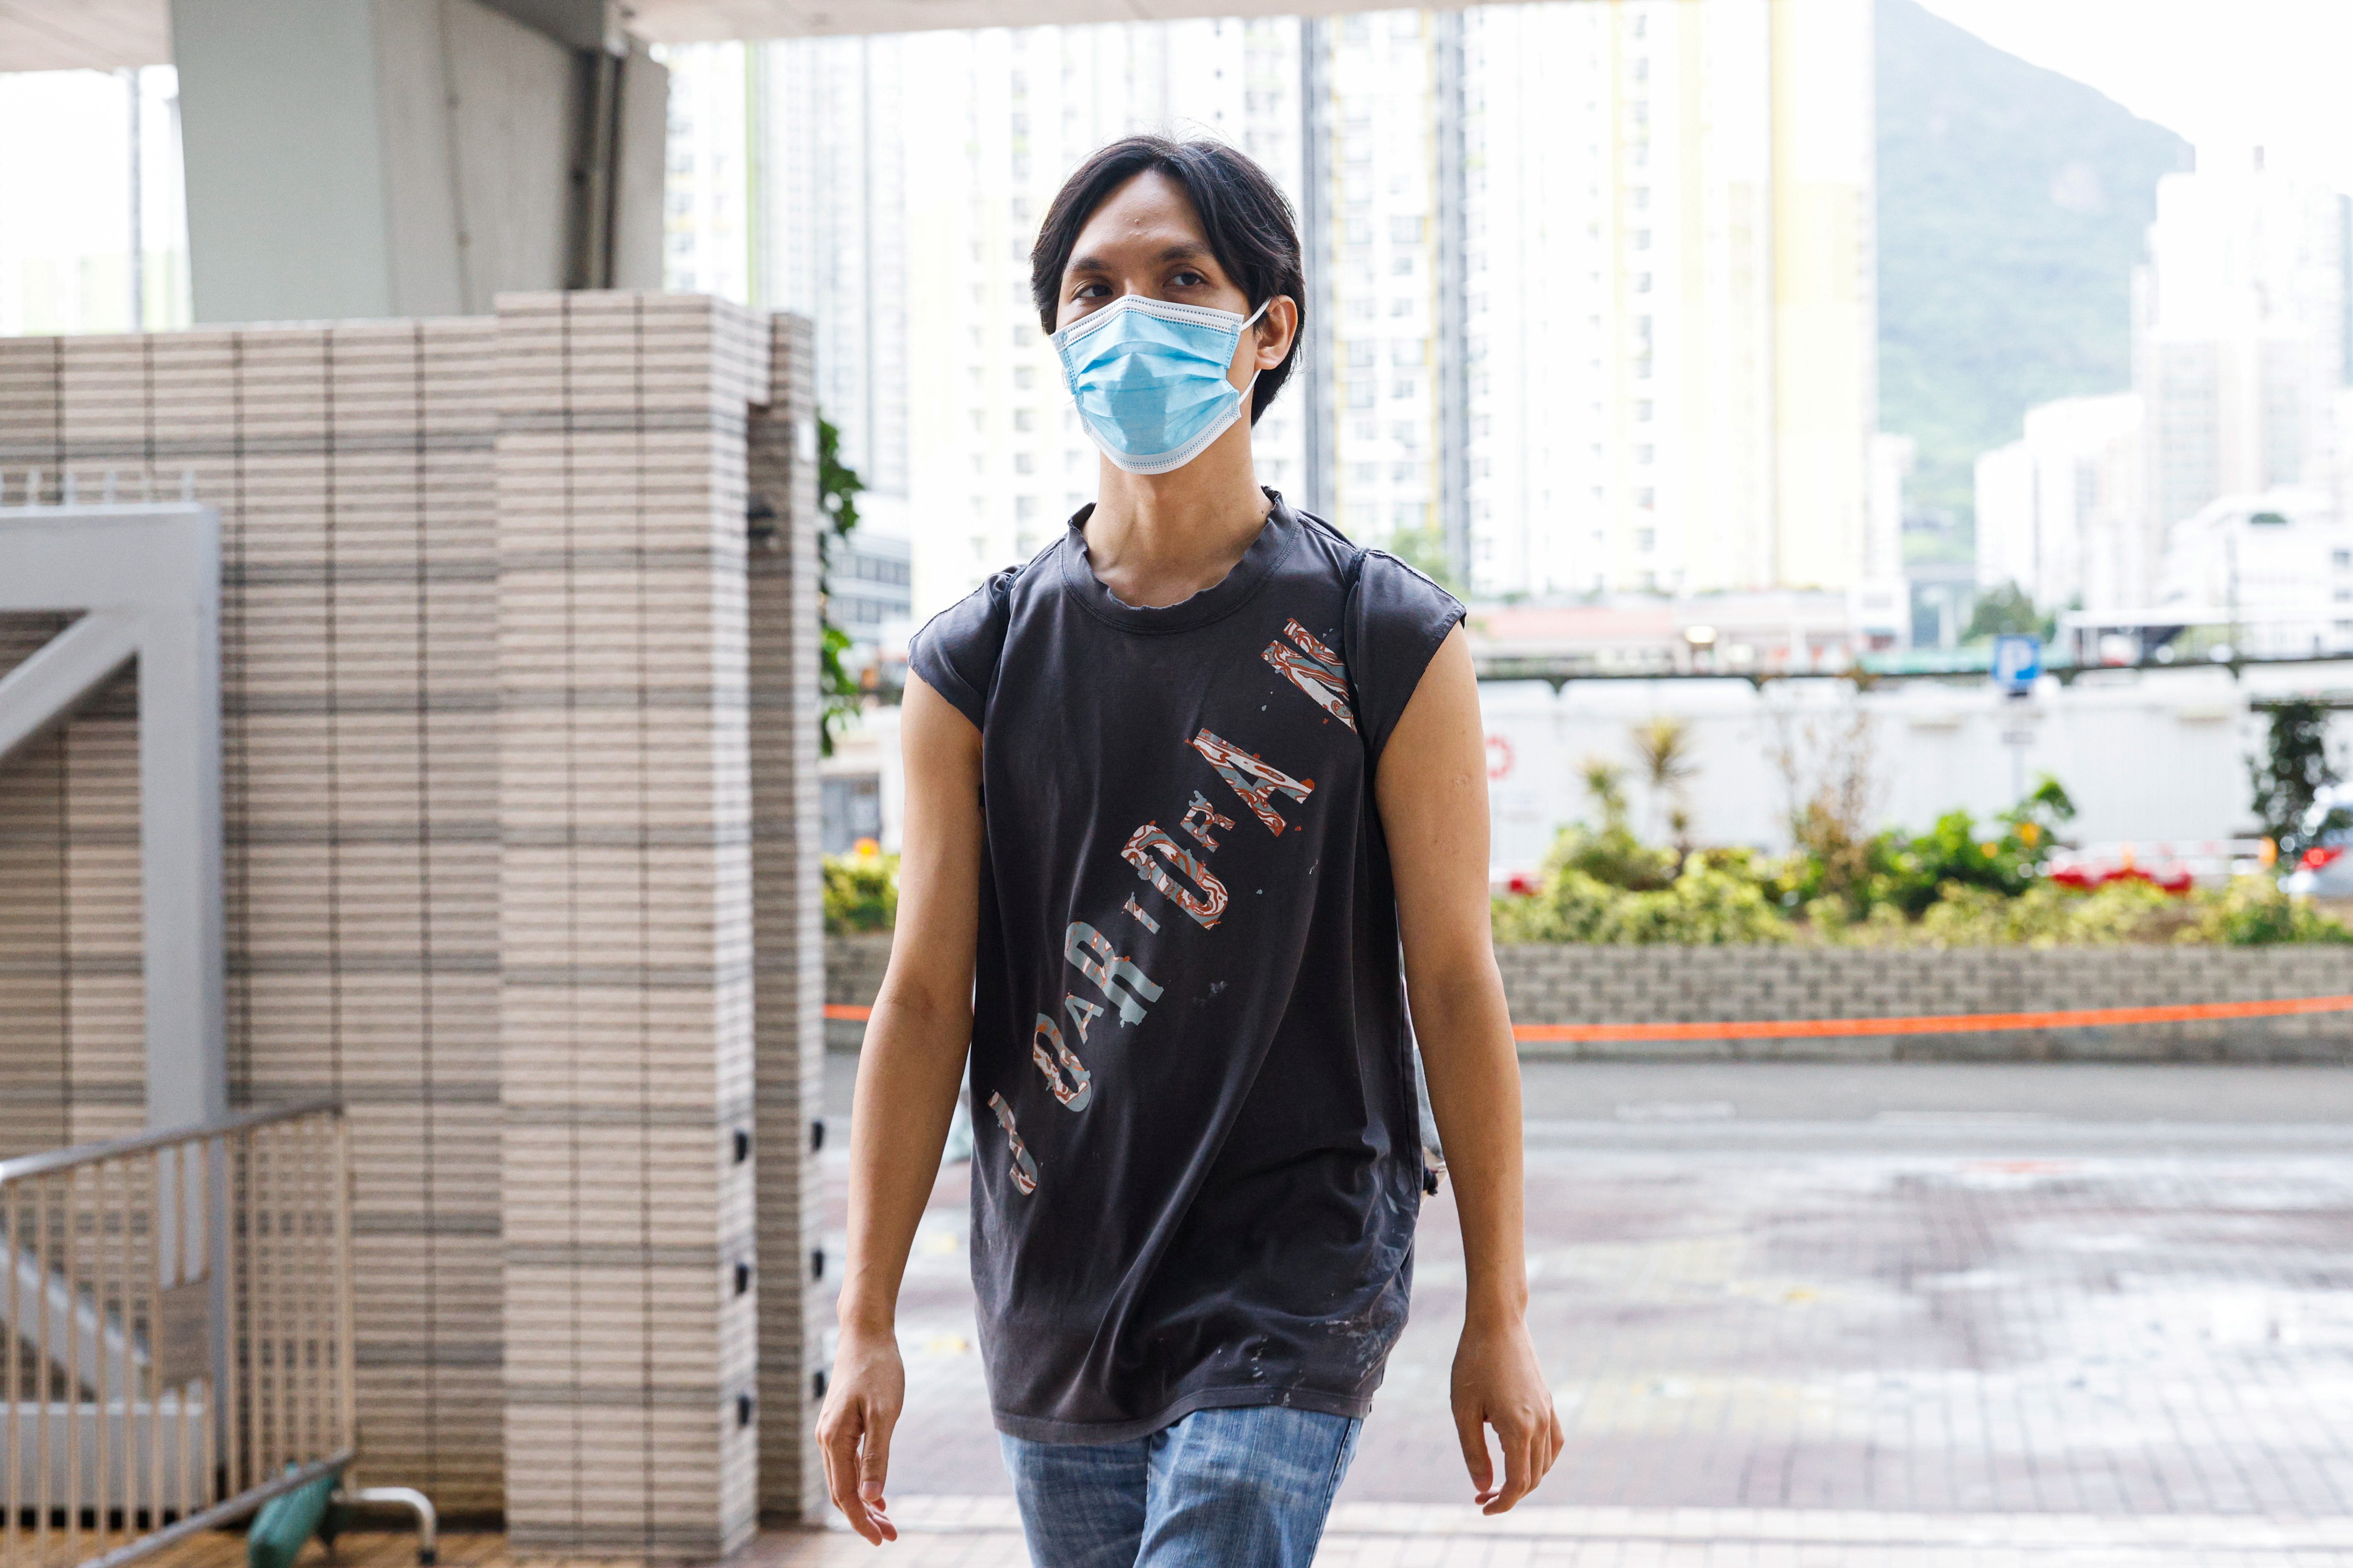 Pro-democracy activist Hendick Lui Chi Hang, one of the 47 pro-democracy activists charged with conspiracy to commit subversion under the national security law, arrives West Kowloon Magistrates's Courts building, in Hong Kong